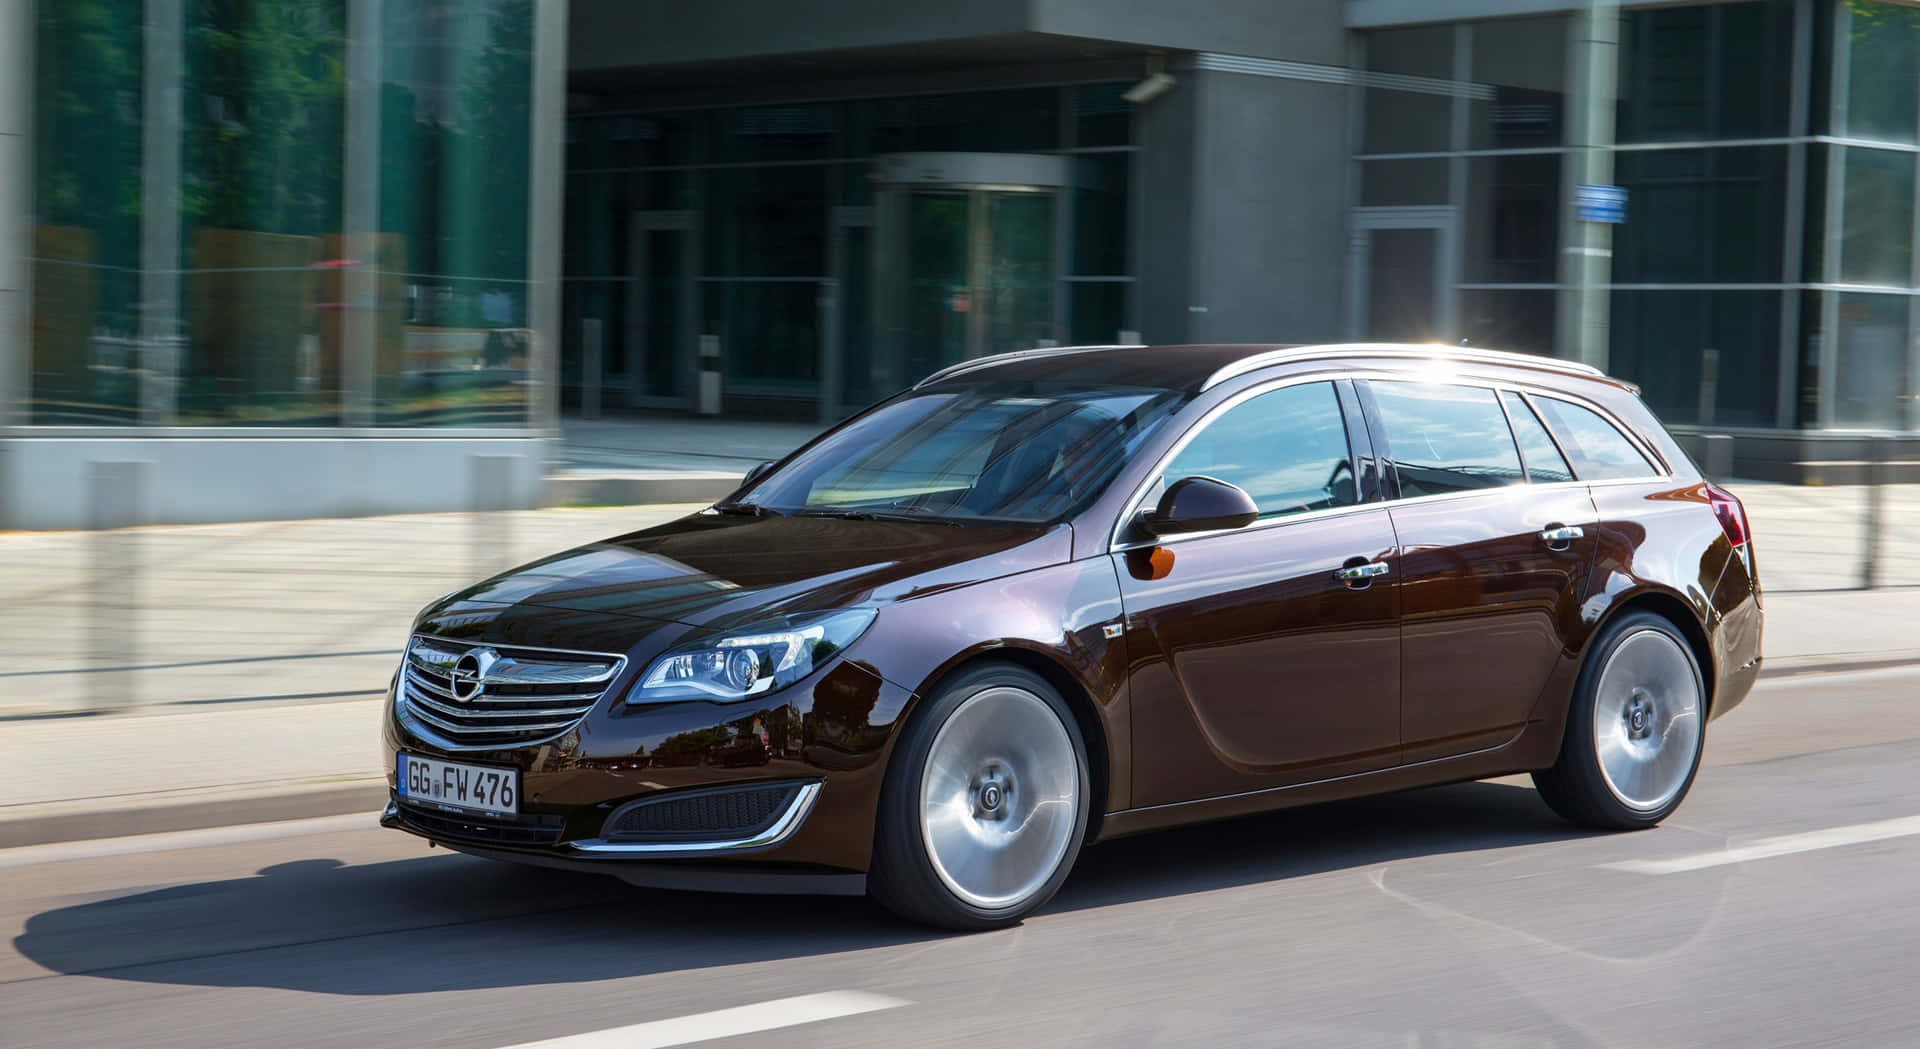 Stunning Opel Insignia on the Road Wallpaper